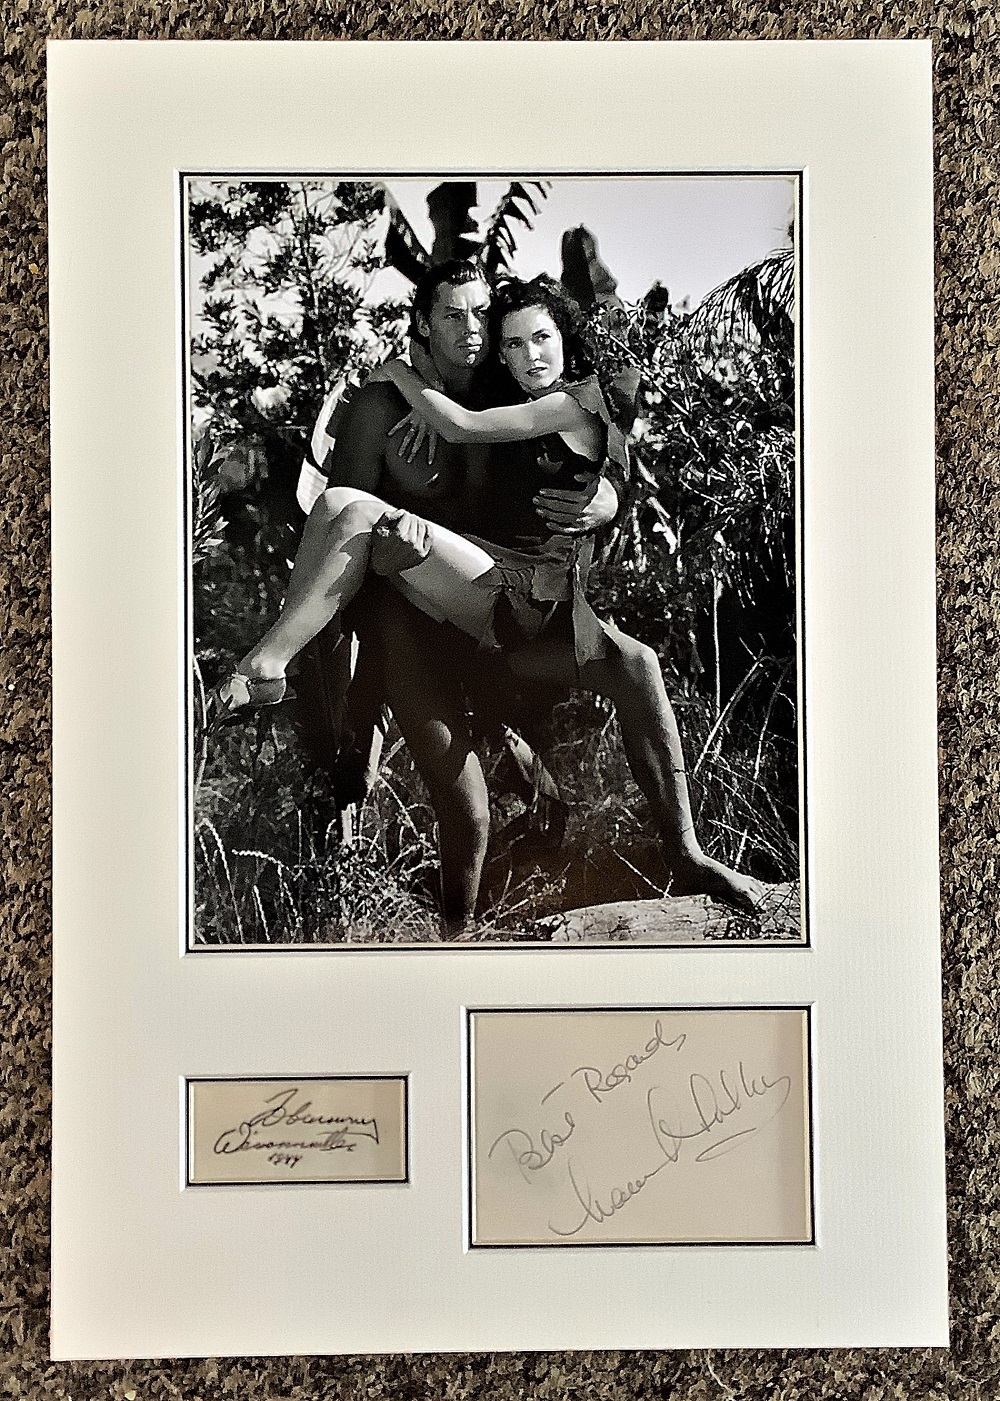 Johnny Weissmuller and Jane Waking 16x11 approx Tarzan mounted signature piece includes two signed